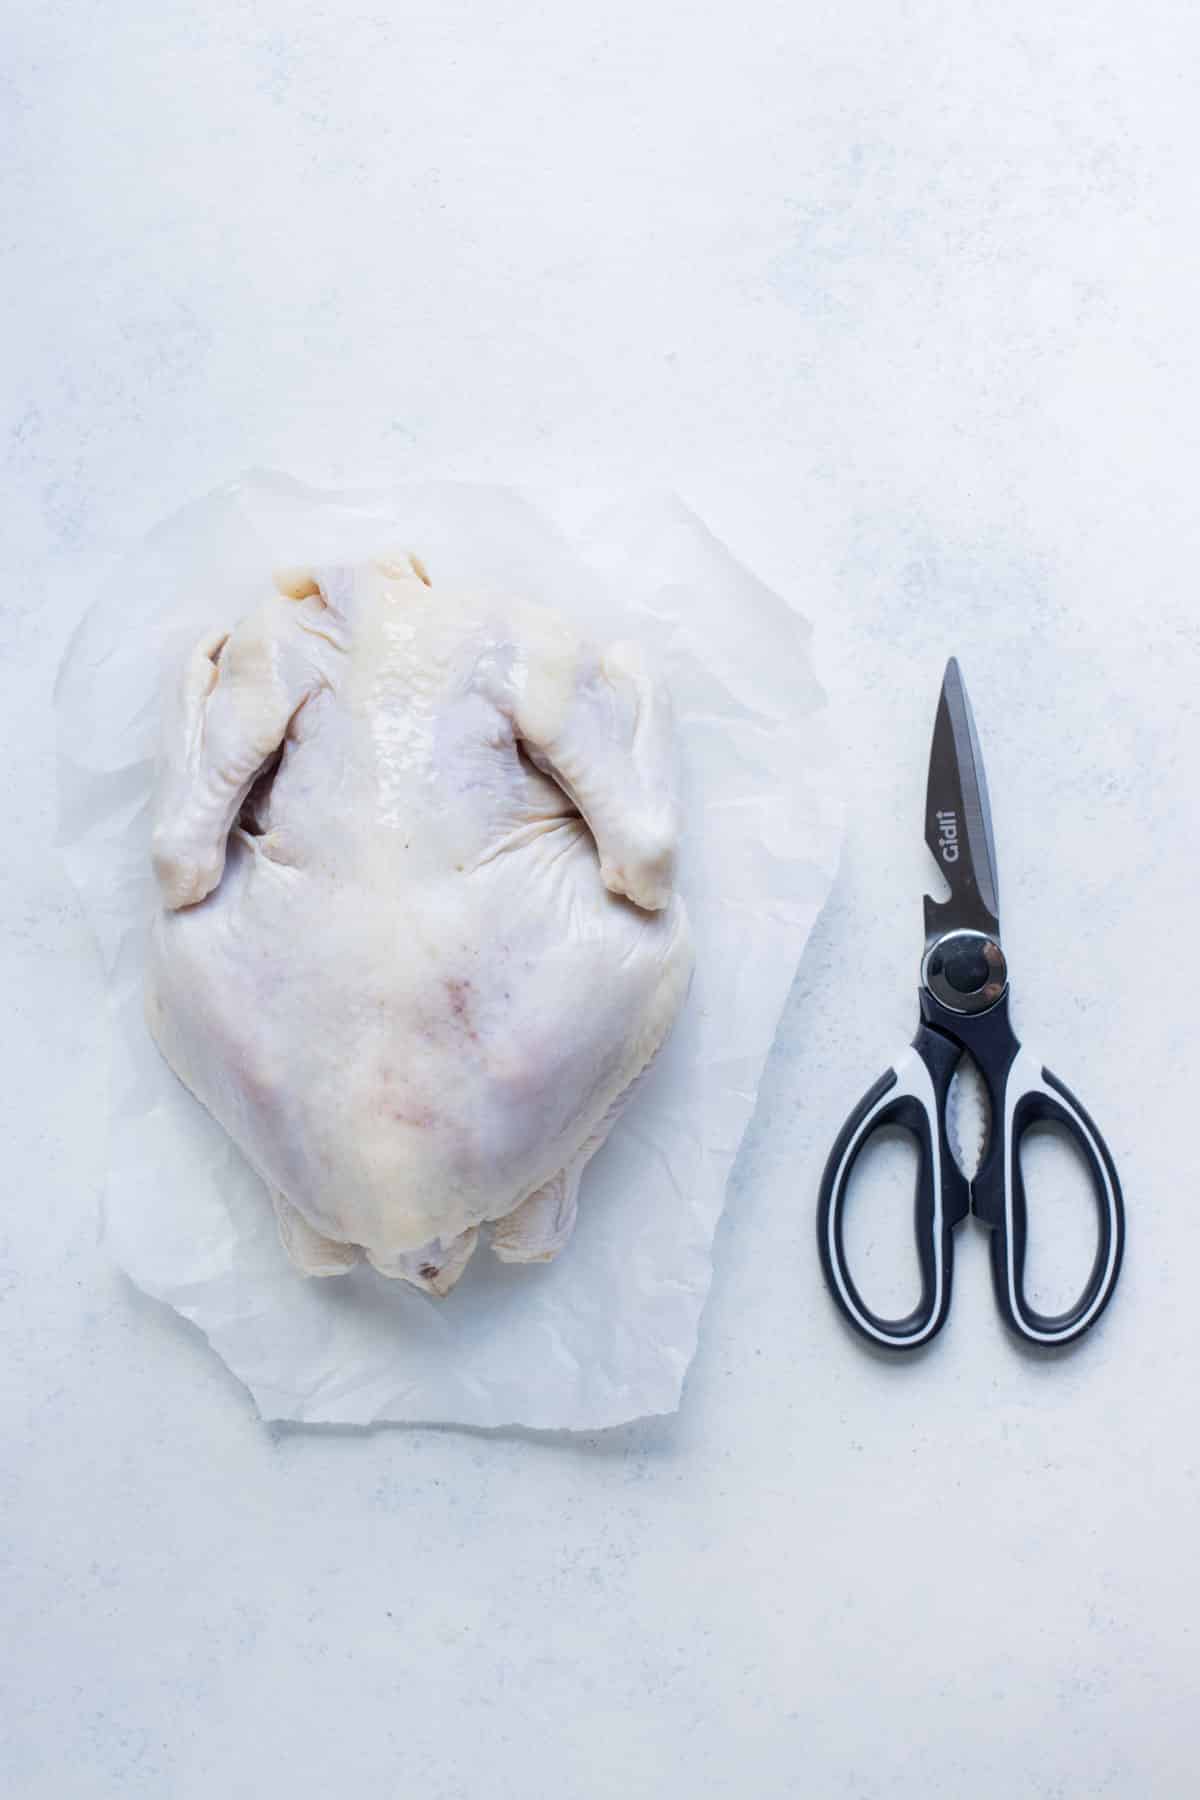 A whole chicken and shears are all you need to spatchcock a chicken.